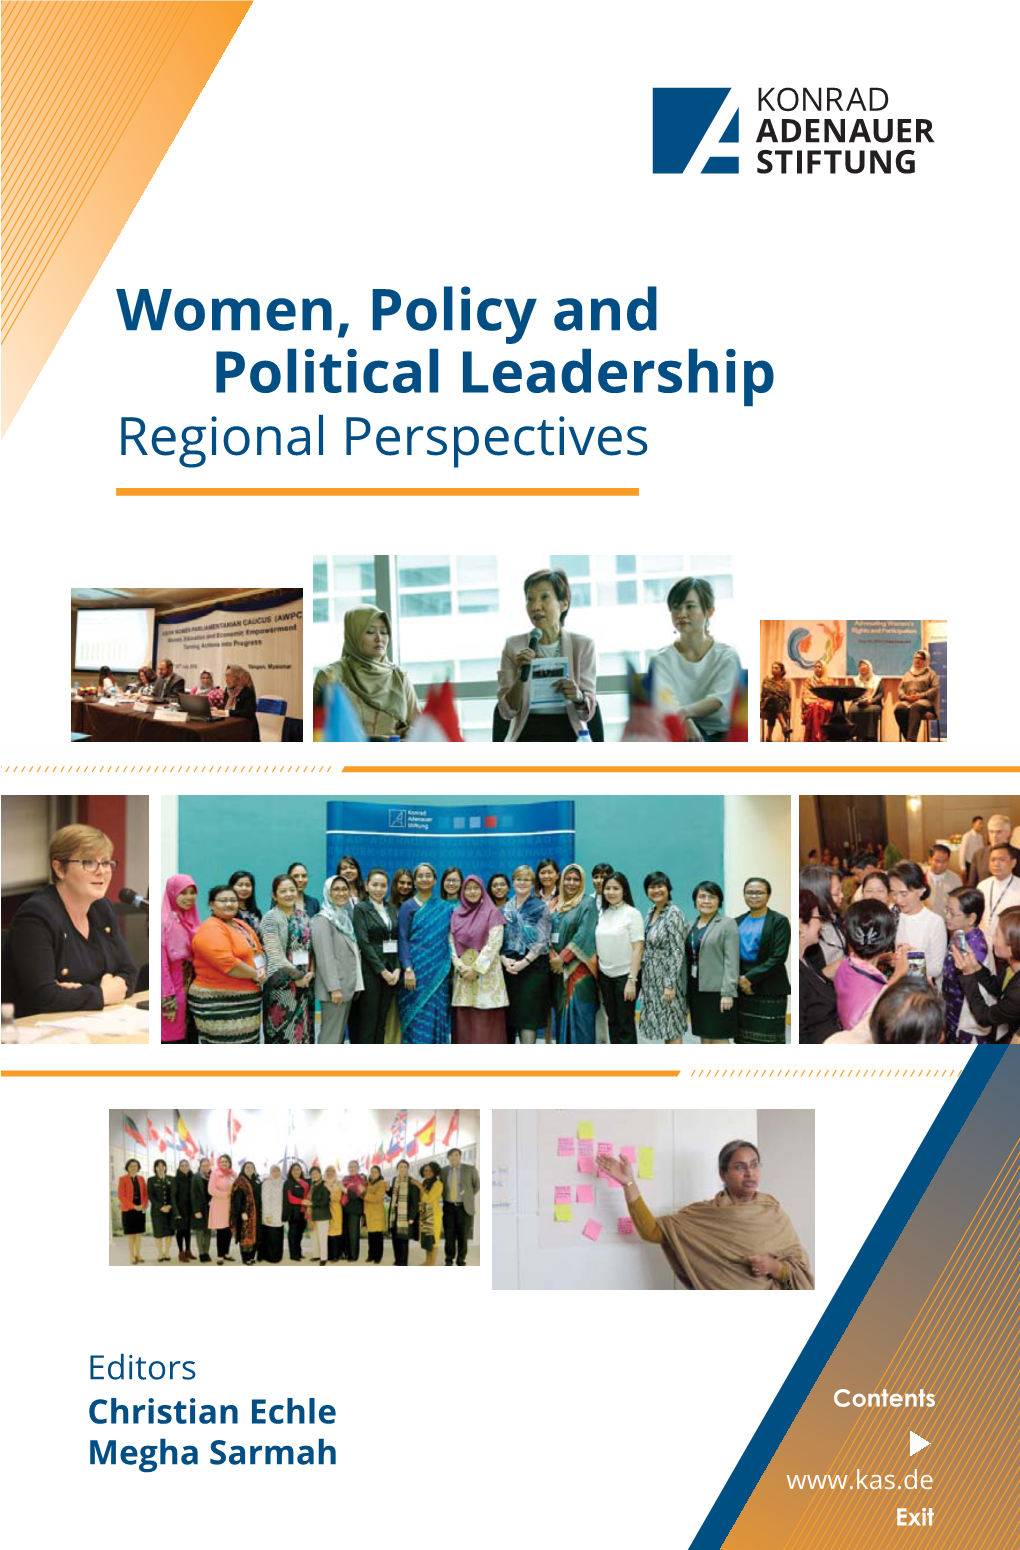 Women, Policy and Political Leadership Regional Perspectives